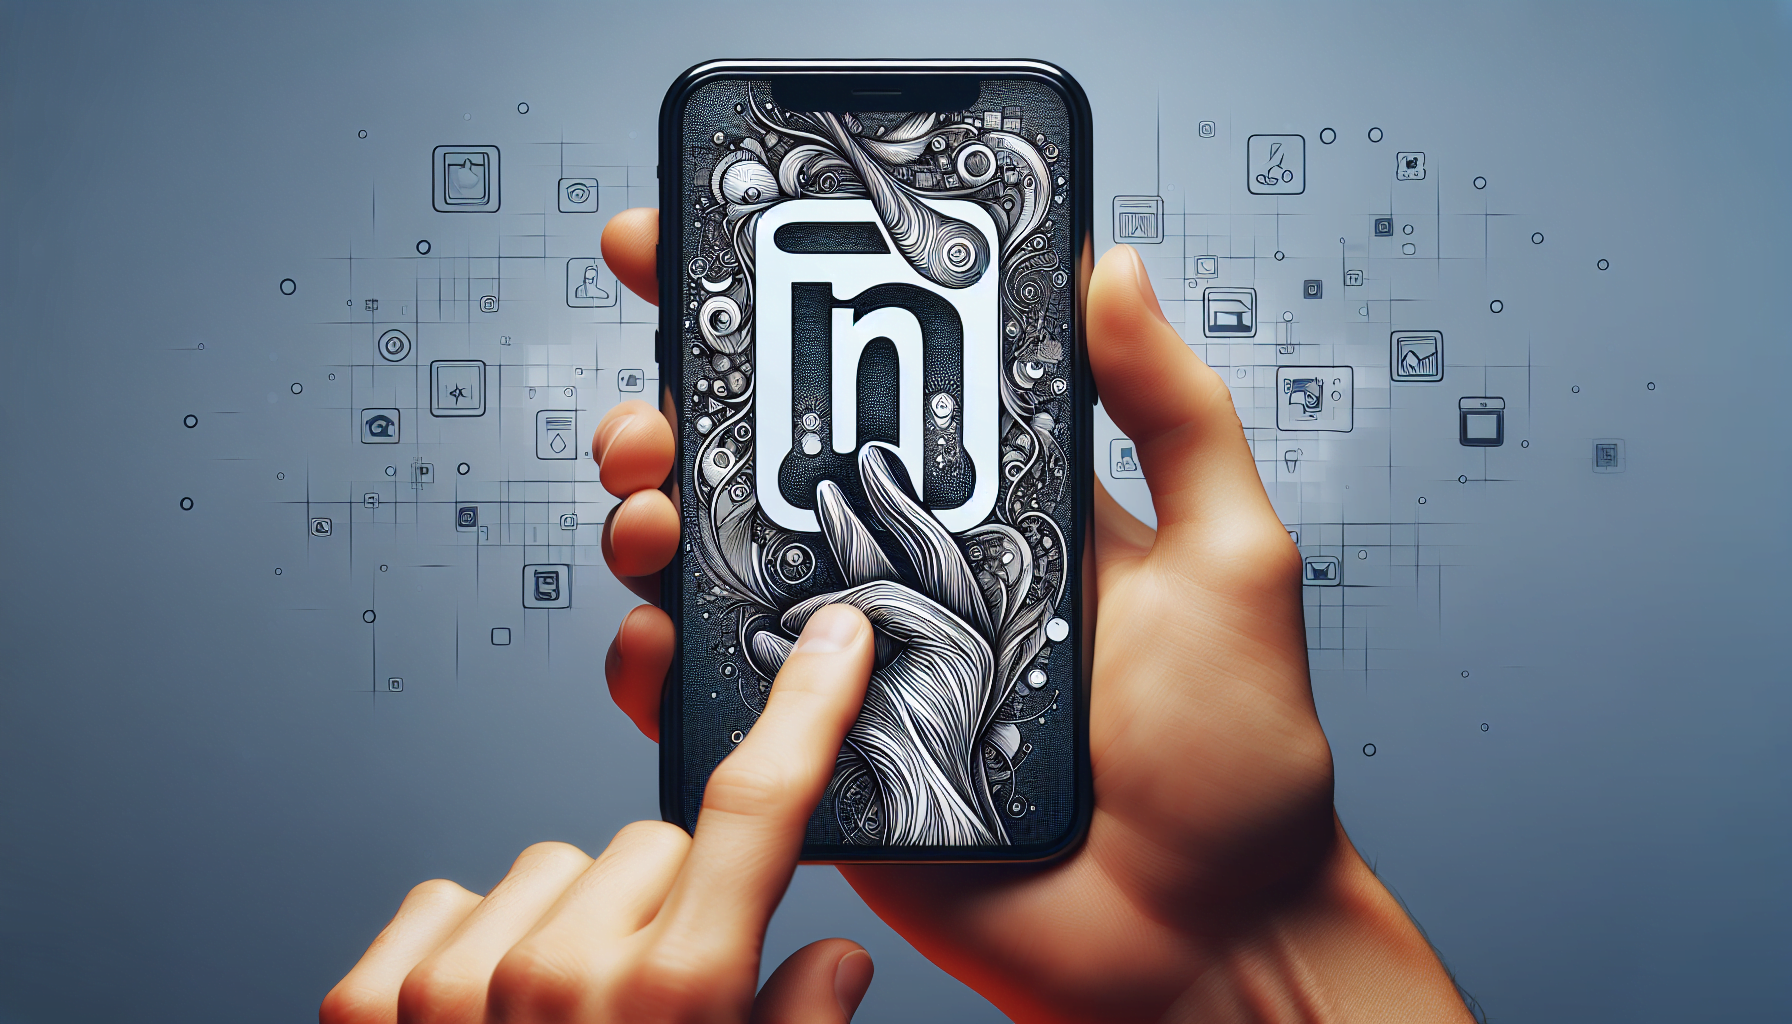 Illustration of a smartphone with the Imginn logo on the screen